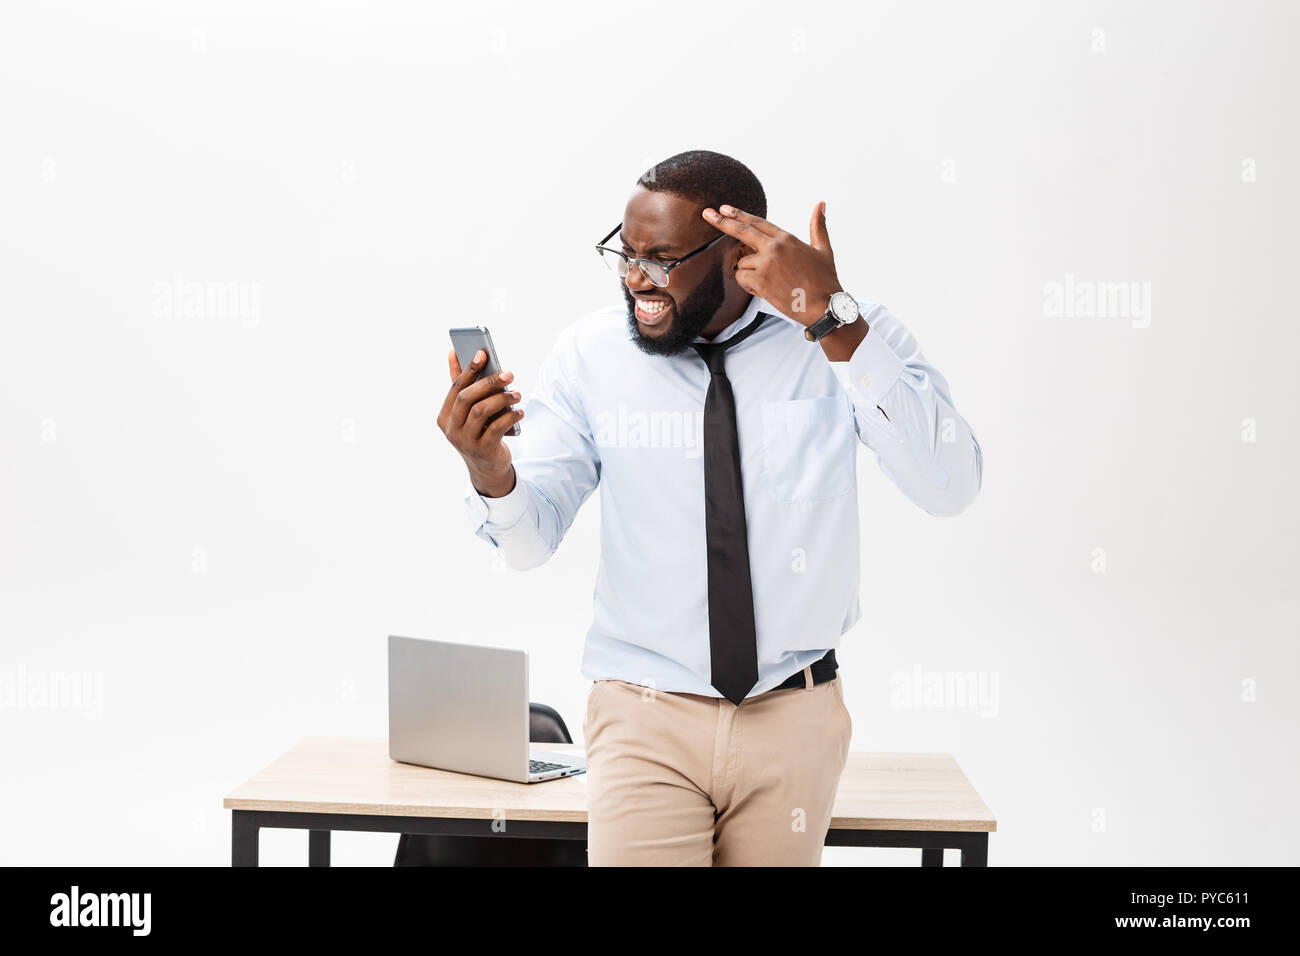 Irritated dark skinned young male enterpreneur being on working place feels very stressed and angry as cannot manage to do all work, surrounded with modern gadgets, looks in displeasure away Stock Photo